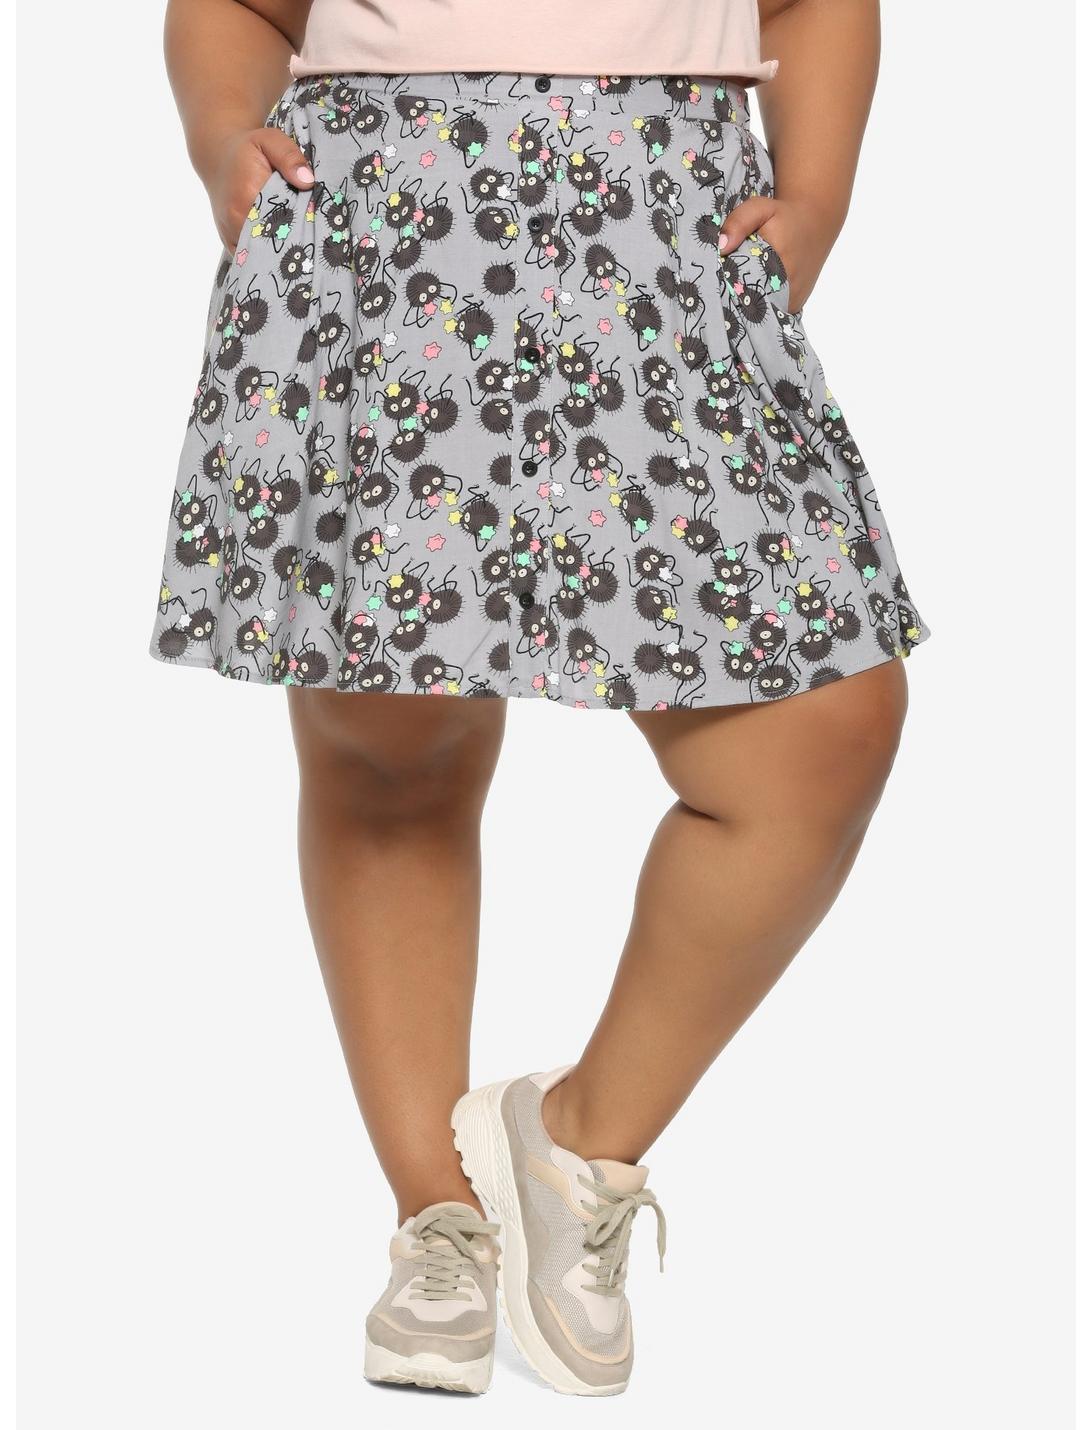 Her Universe Studio Ghibli Spirited Away Soot Sprite Button-Front Skirt Plus Size, MULTI, hi-res